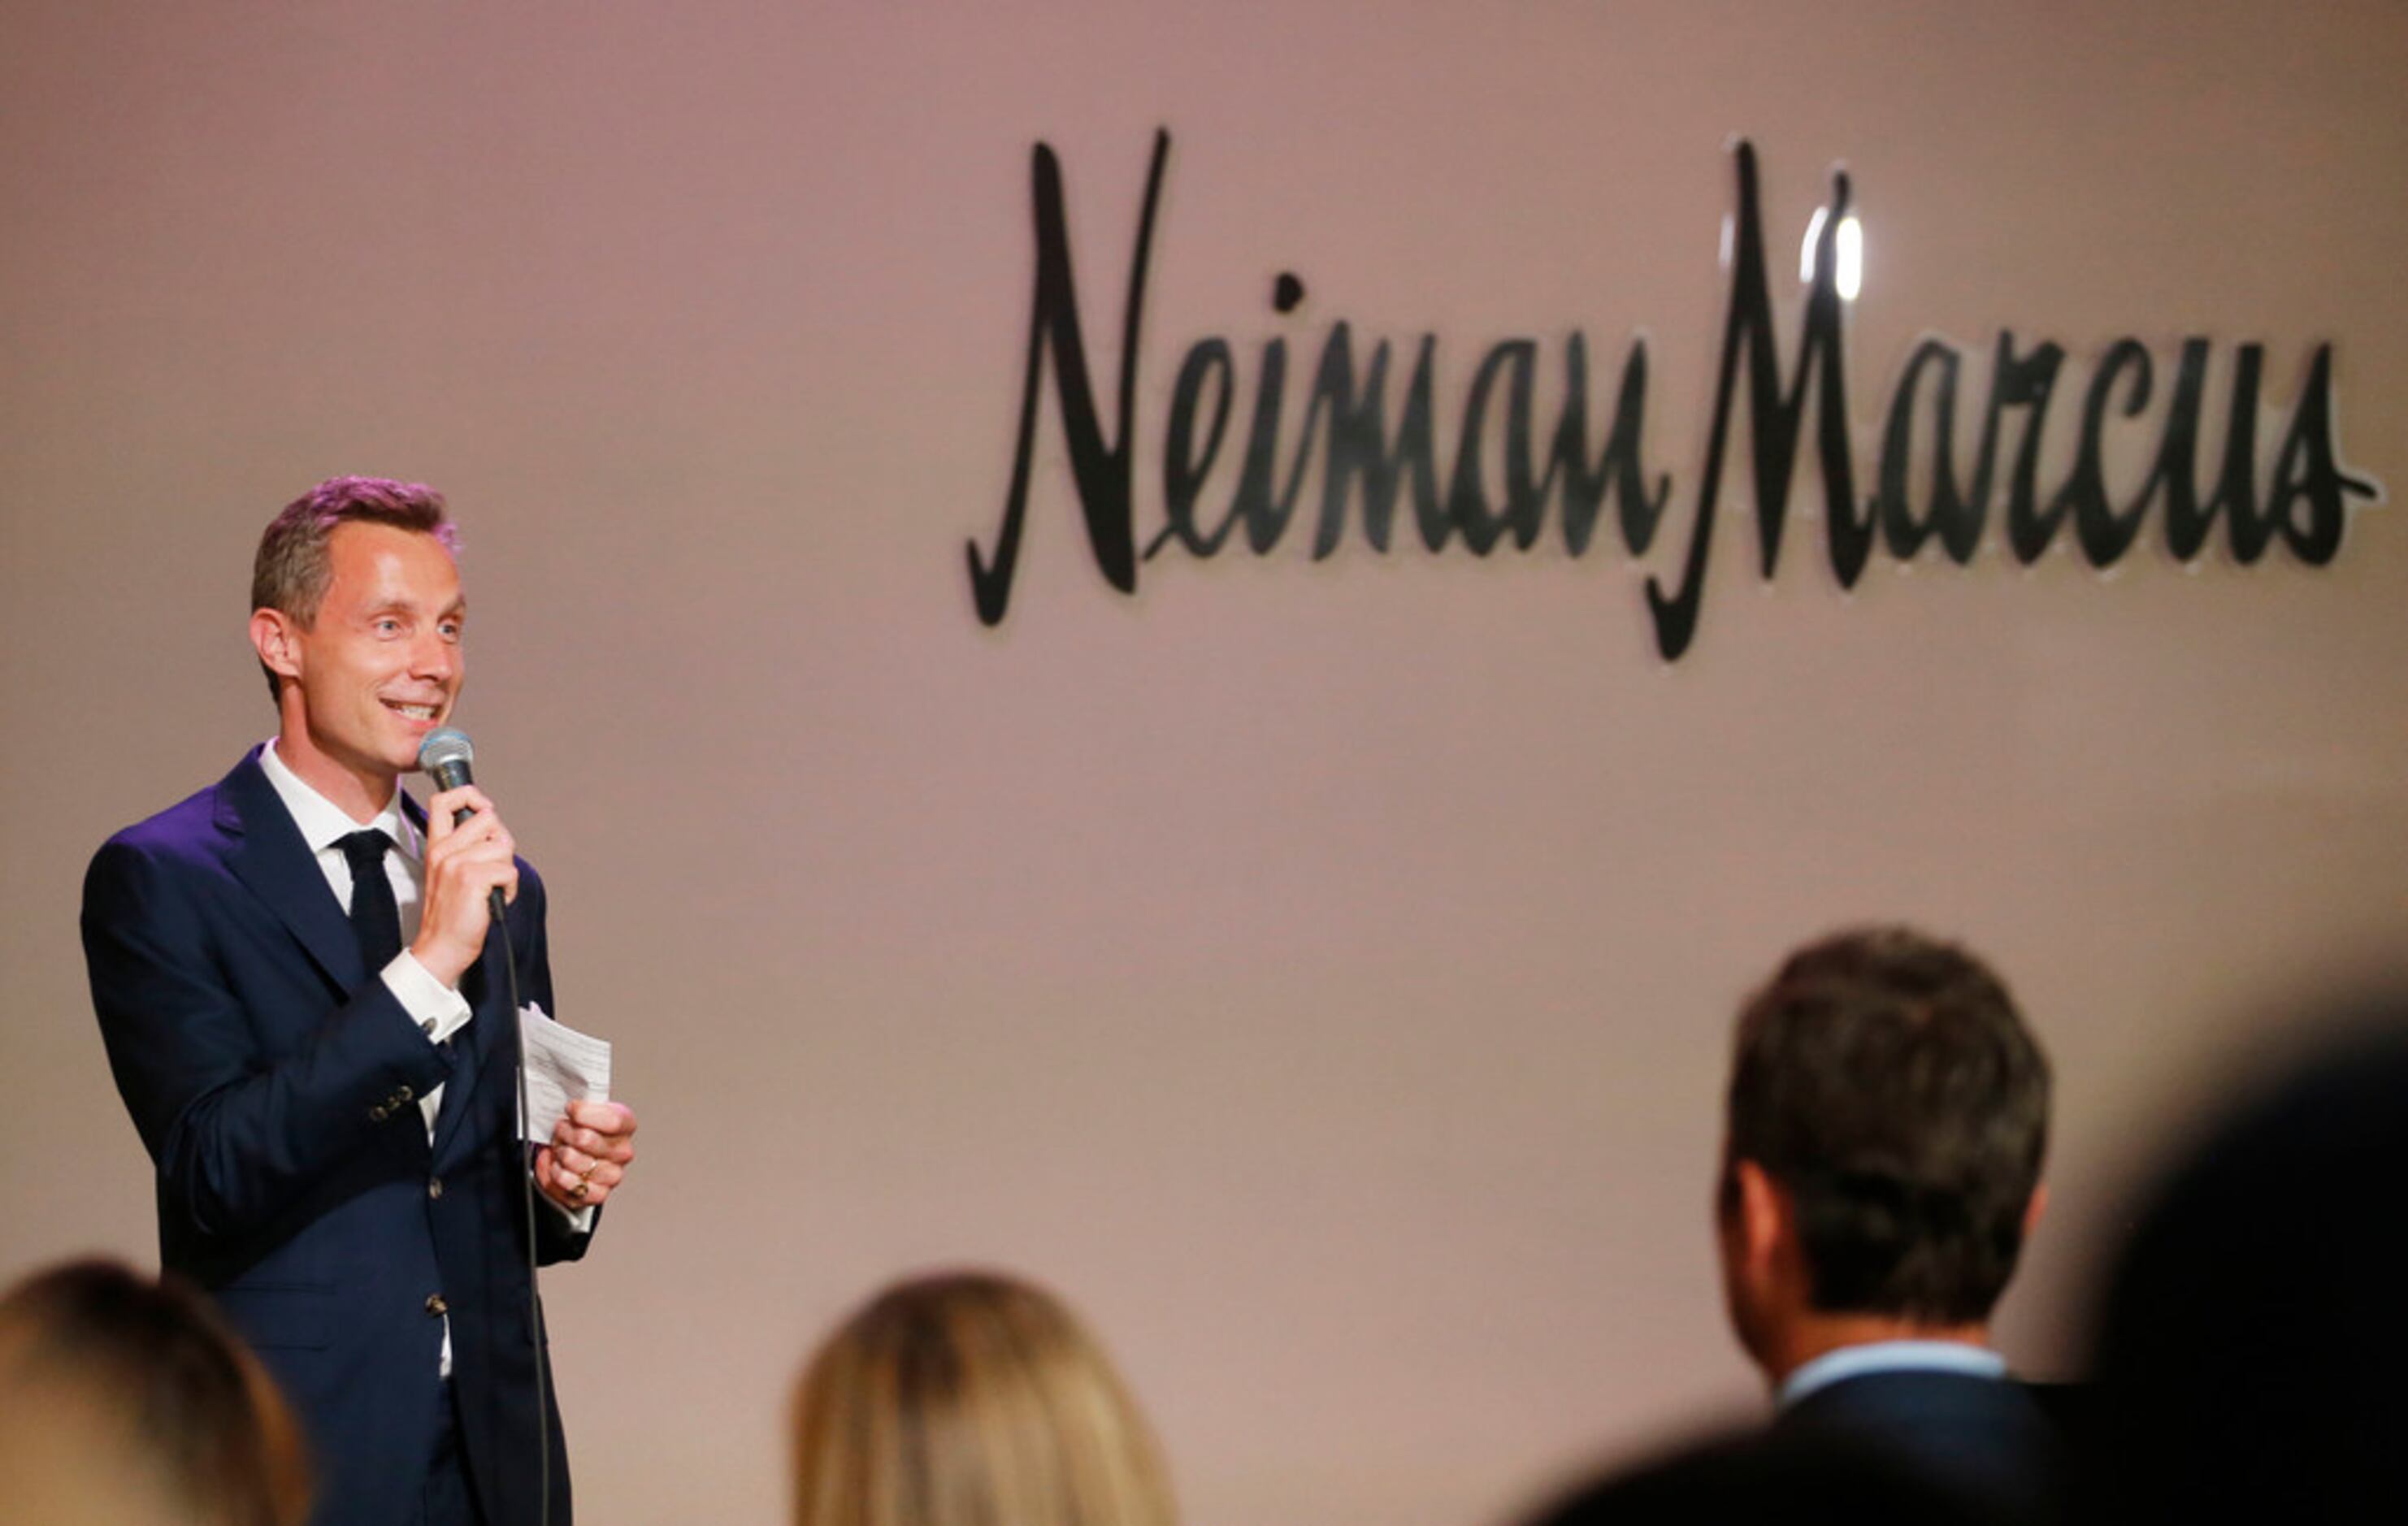 SAY CHEESE! 👄🧀 on X: Neiman Marcus CEO says he only wants Rich